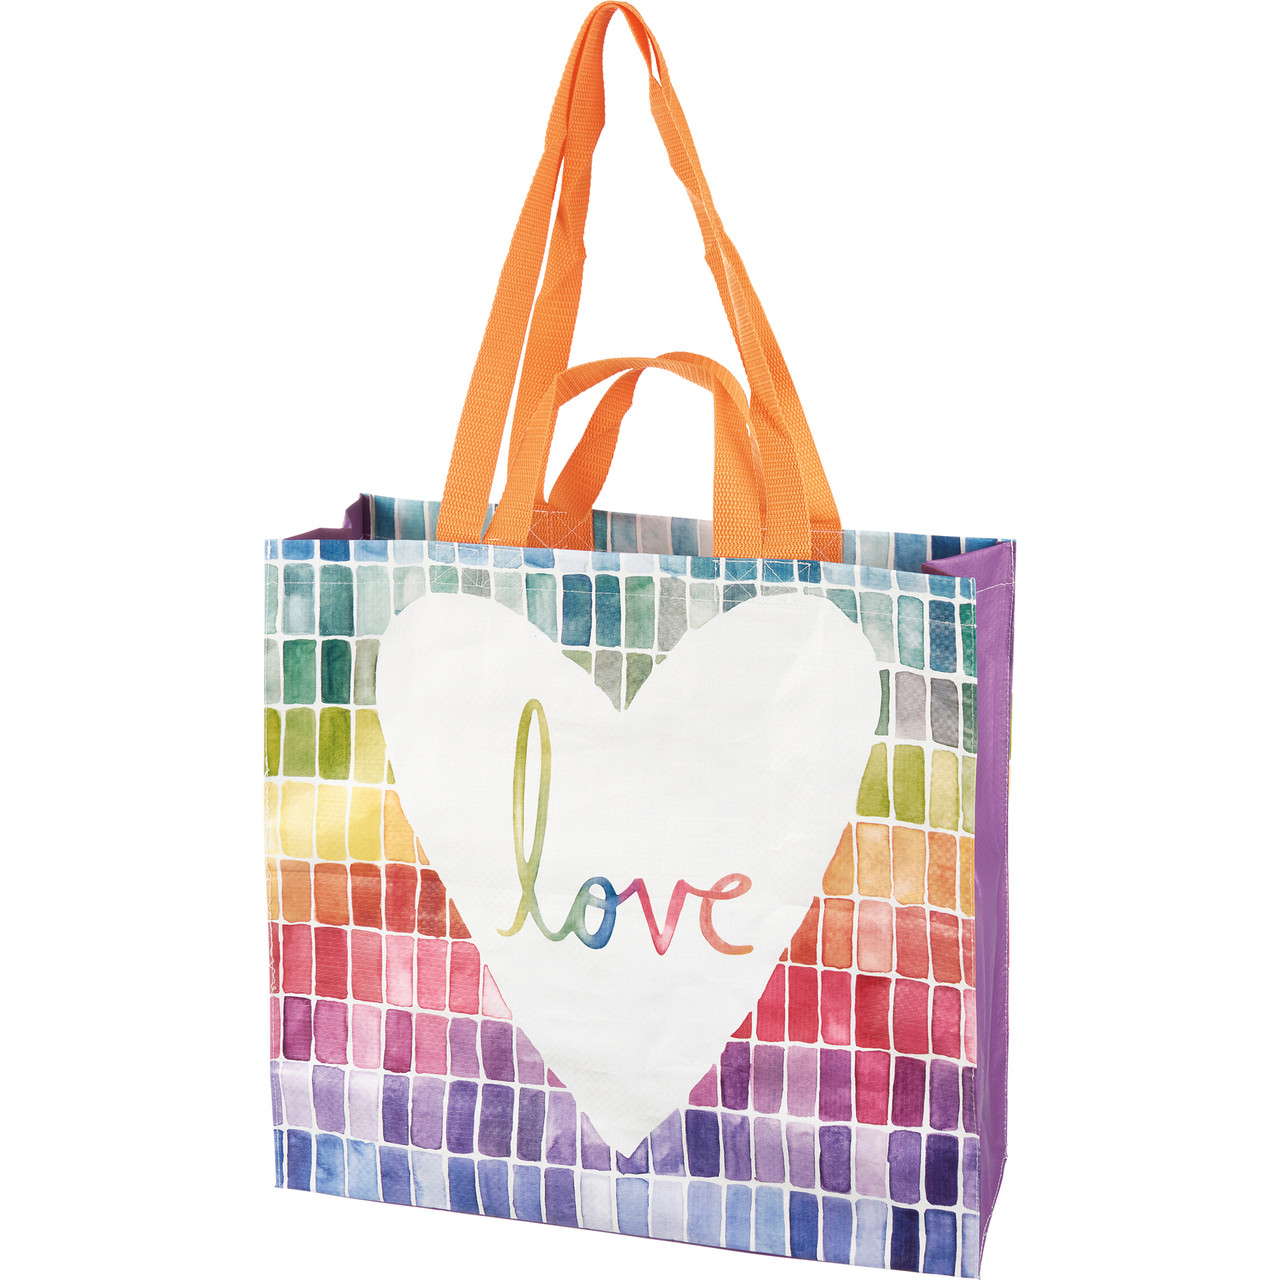 Primitives by Kathy 'Be You' Rainbow Tote One-Size